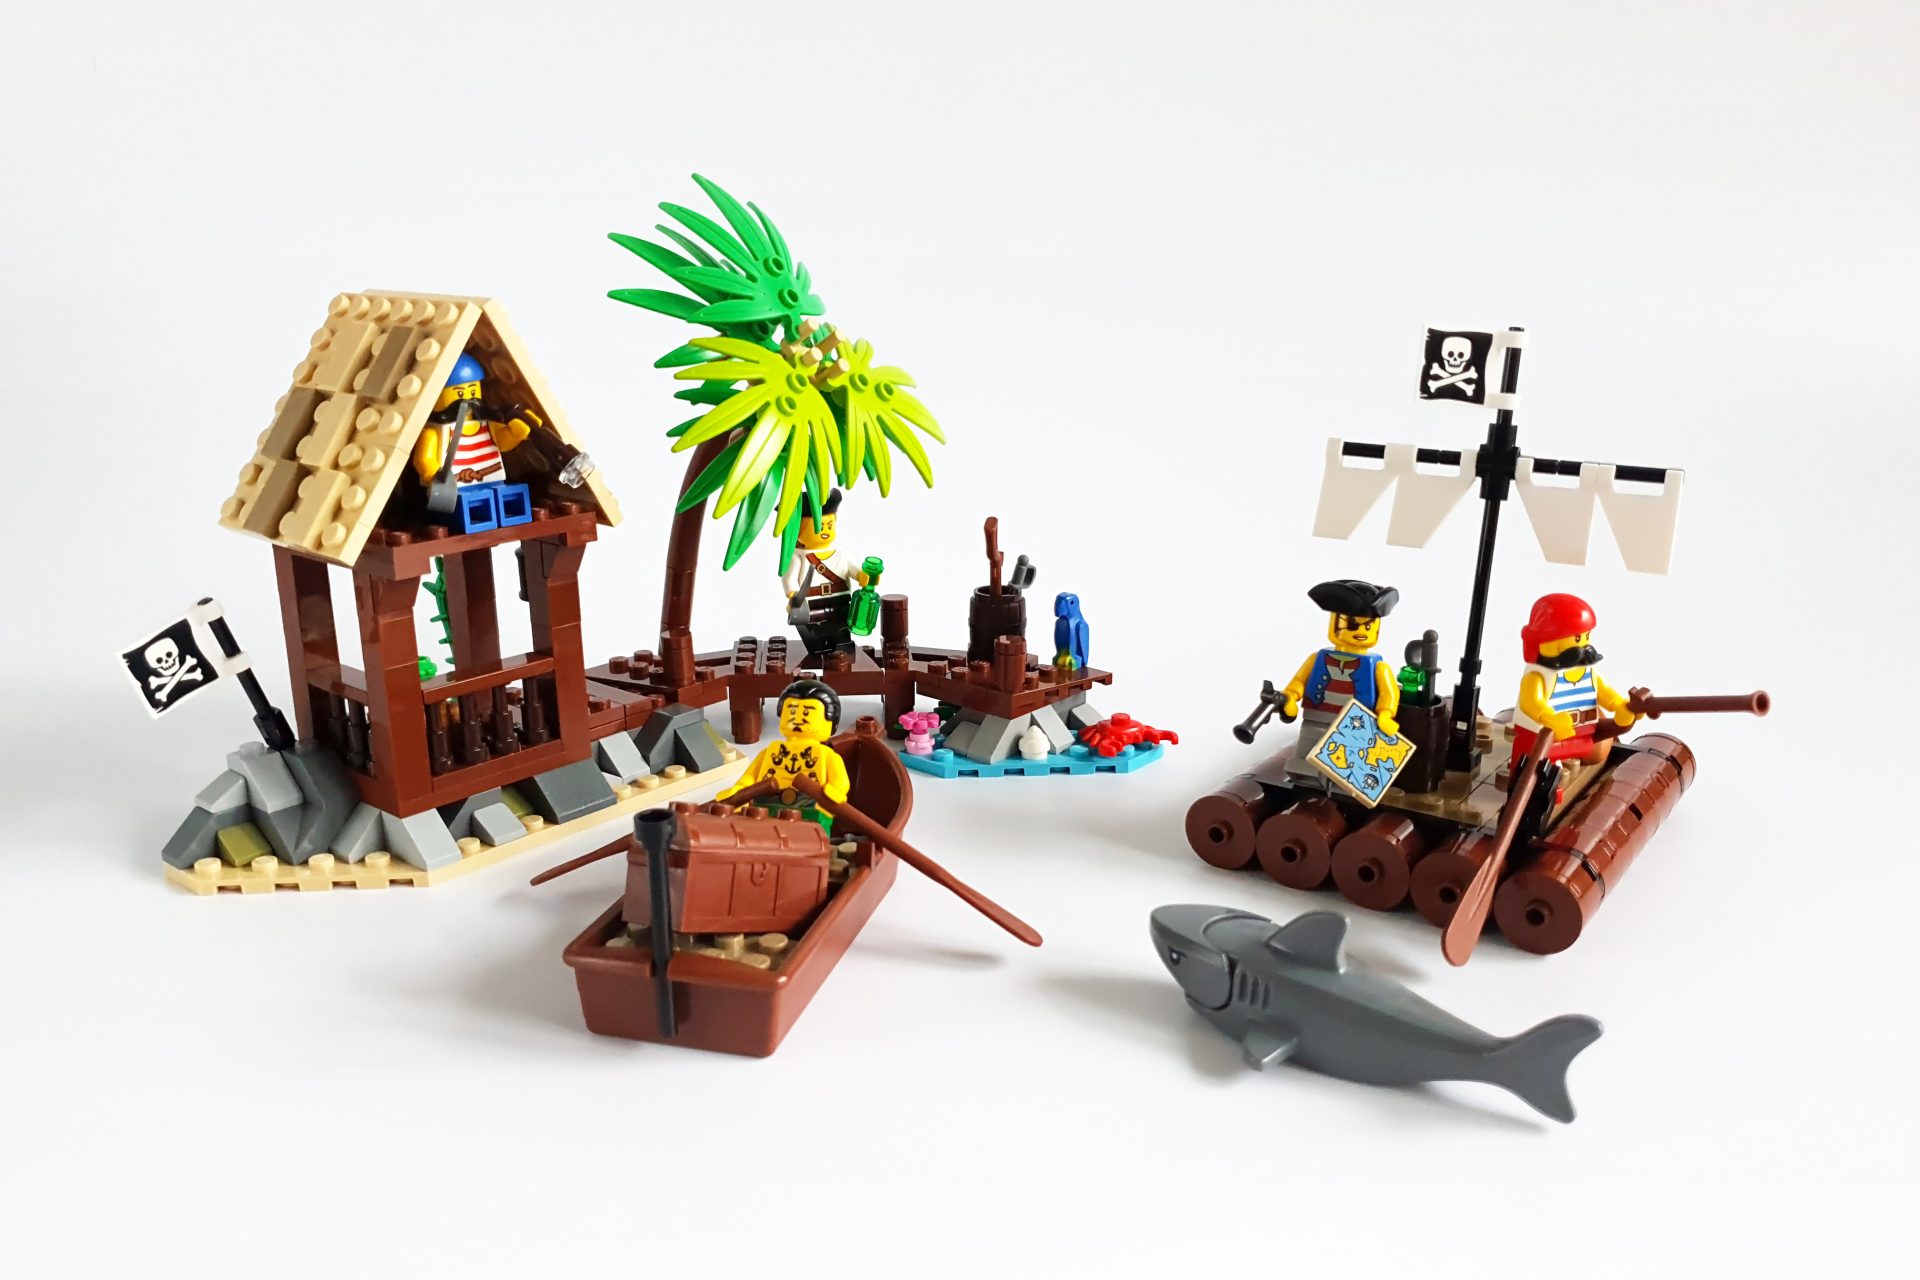 Featured Image for "Smuggler's Shanty and Castaway's Raft" by Kozikyo86